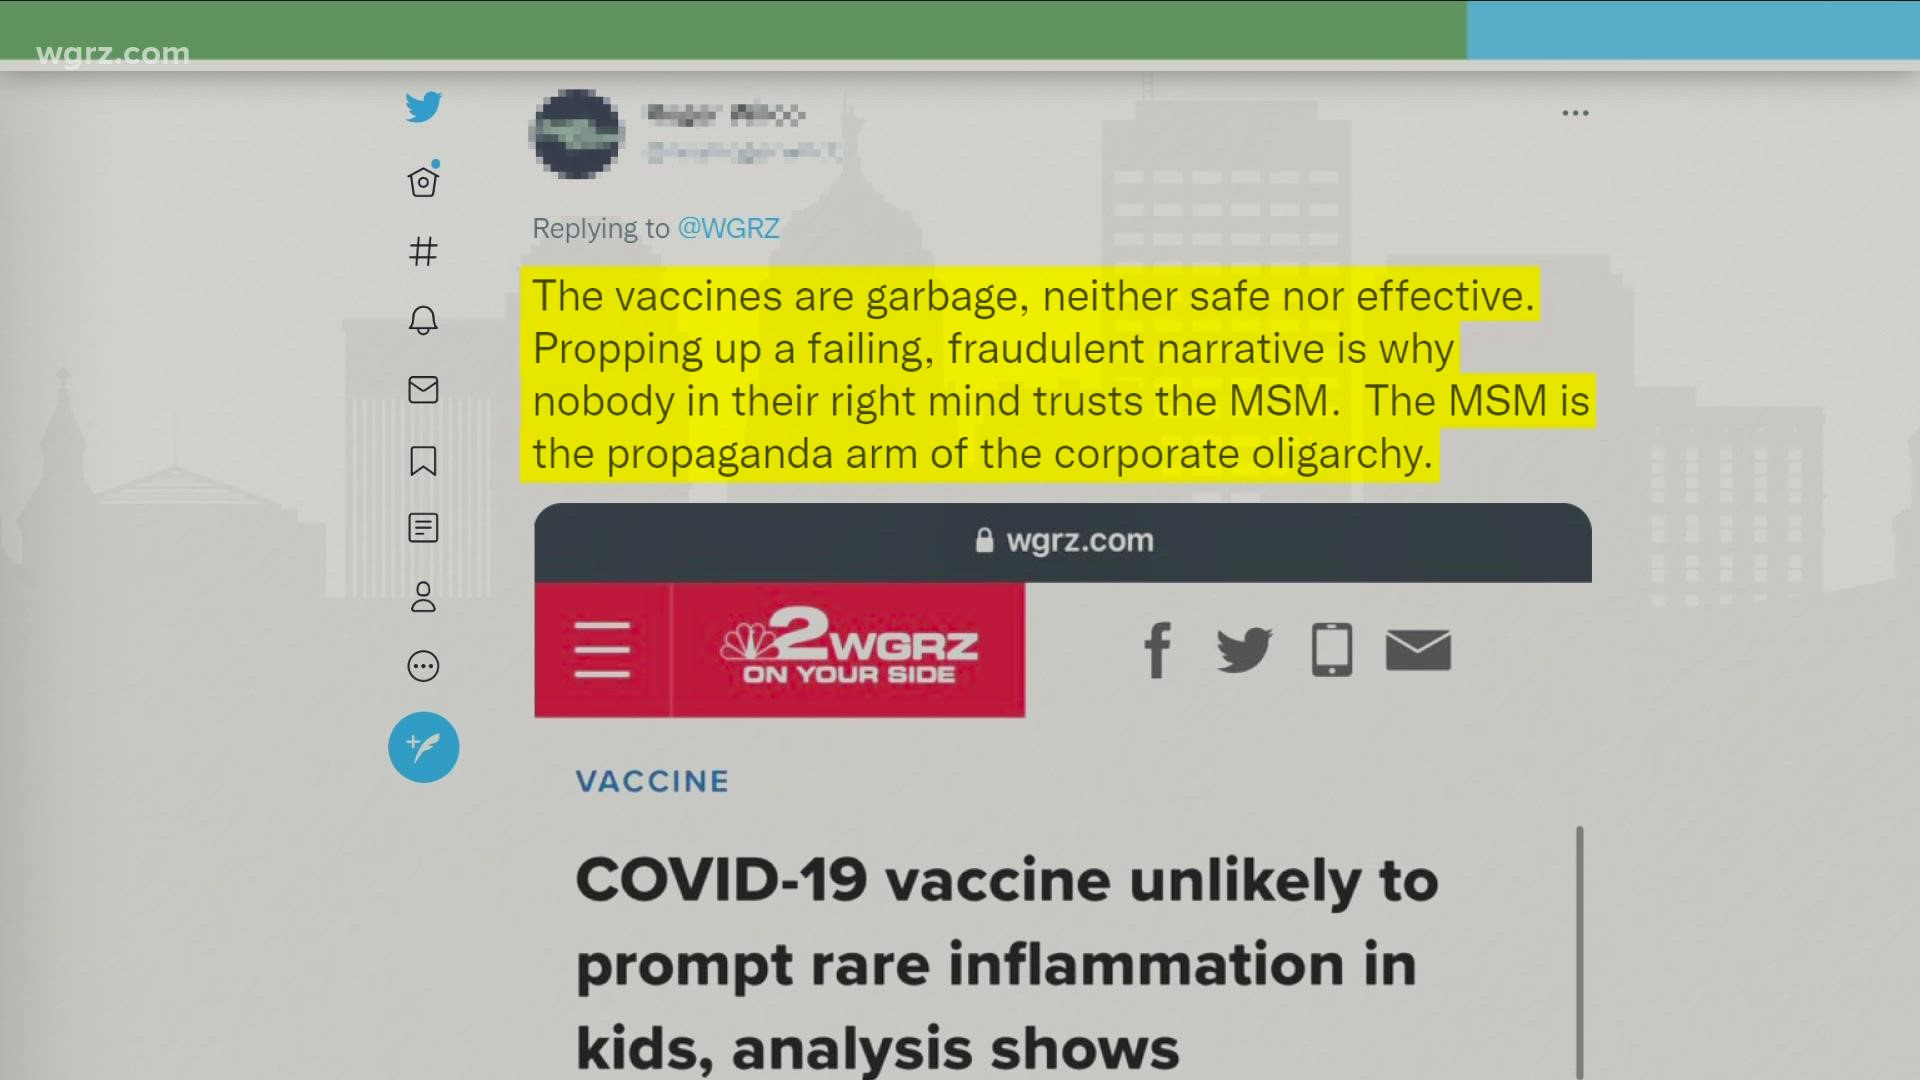 The data show that the COVID-19 vaccines, while imperfect, are effective at preventing severe disease, despite what you may read on social media.